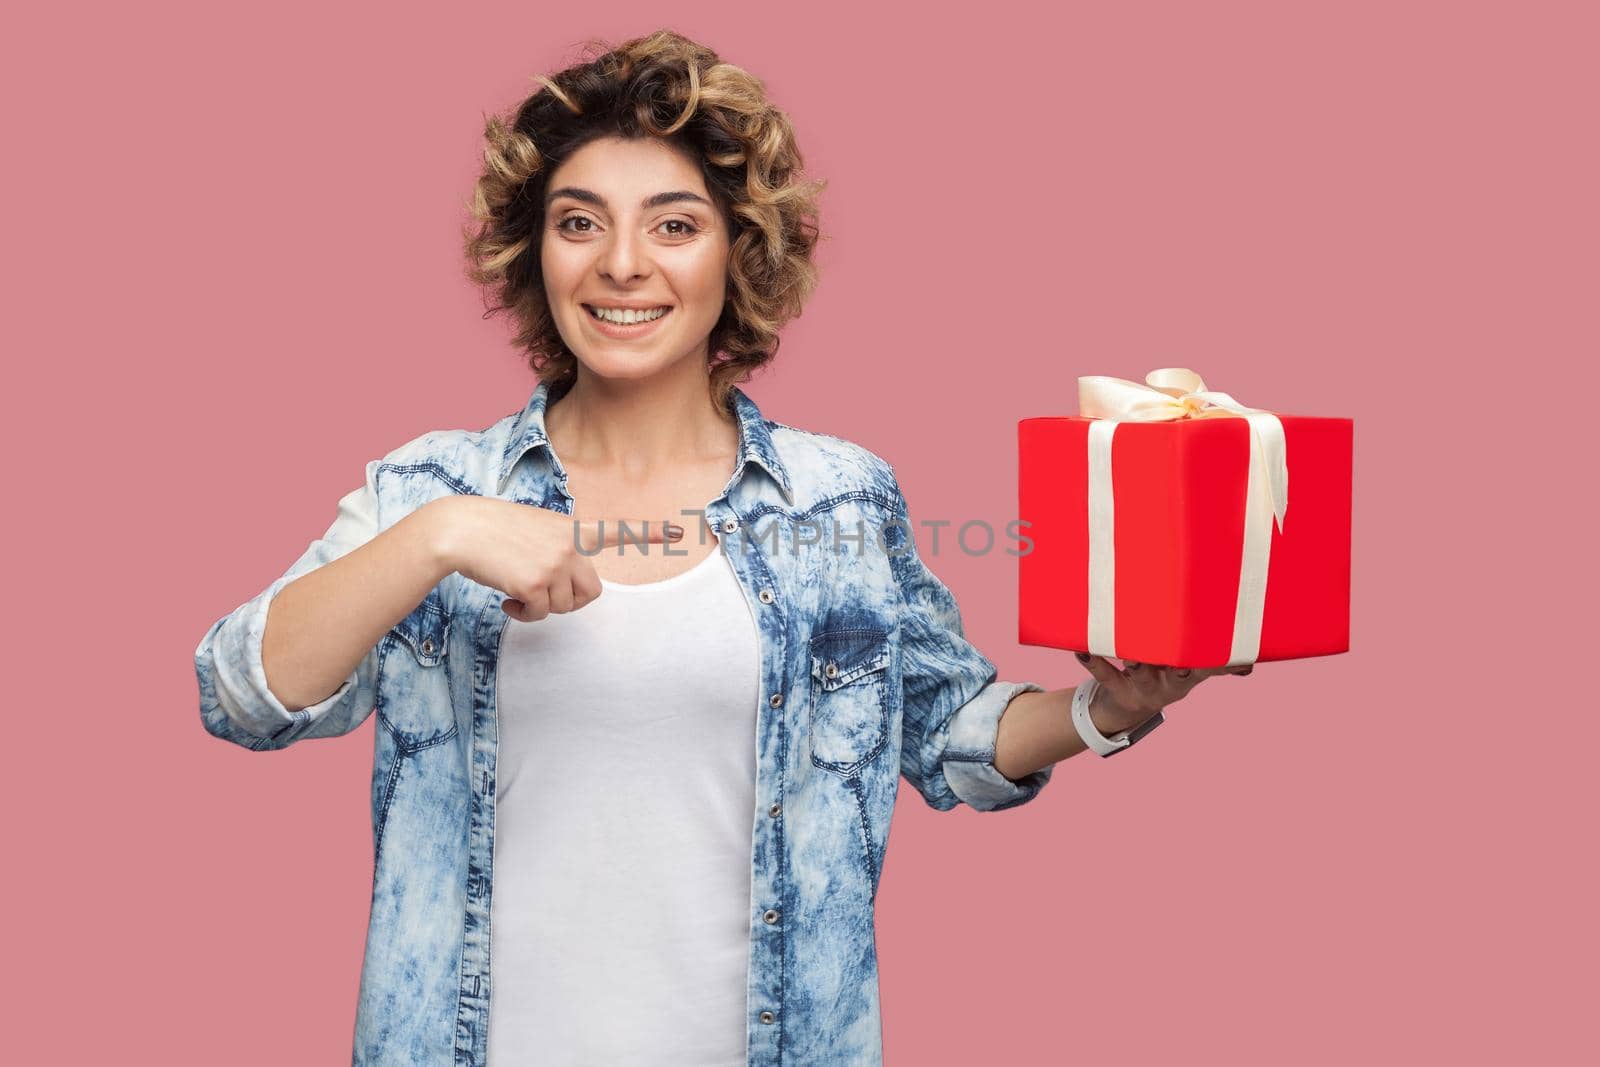 Portrait of happy young woman in blue shirt with curlty hairstyle holding red gift box and pointing finger, looking at camera. Indoor, isolated, studio shot, copy space, pink background